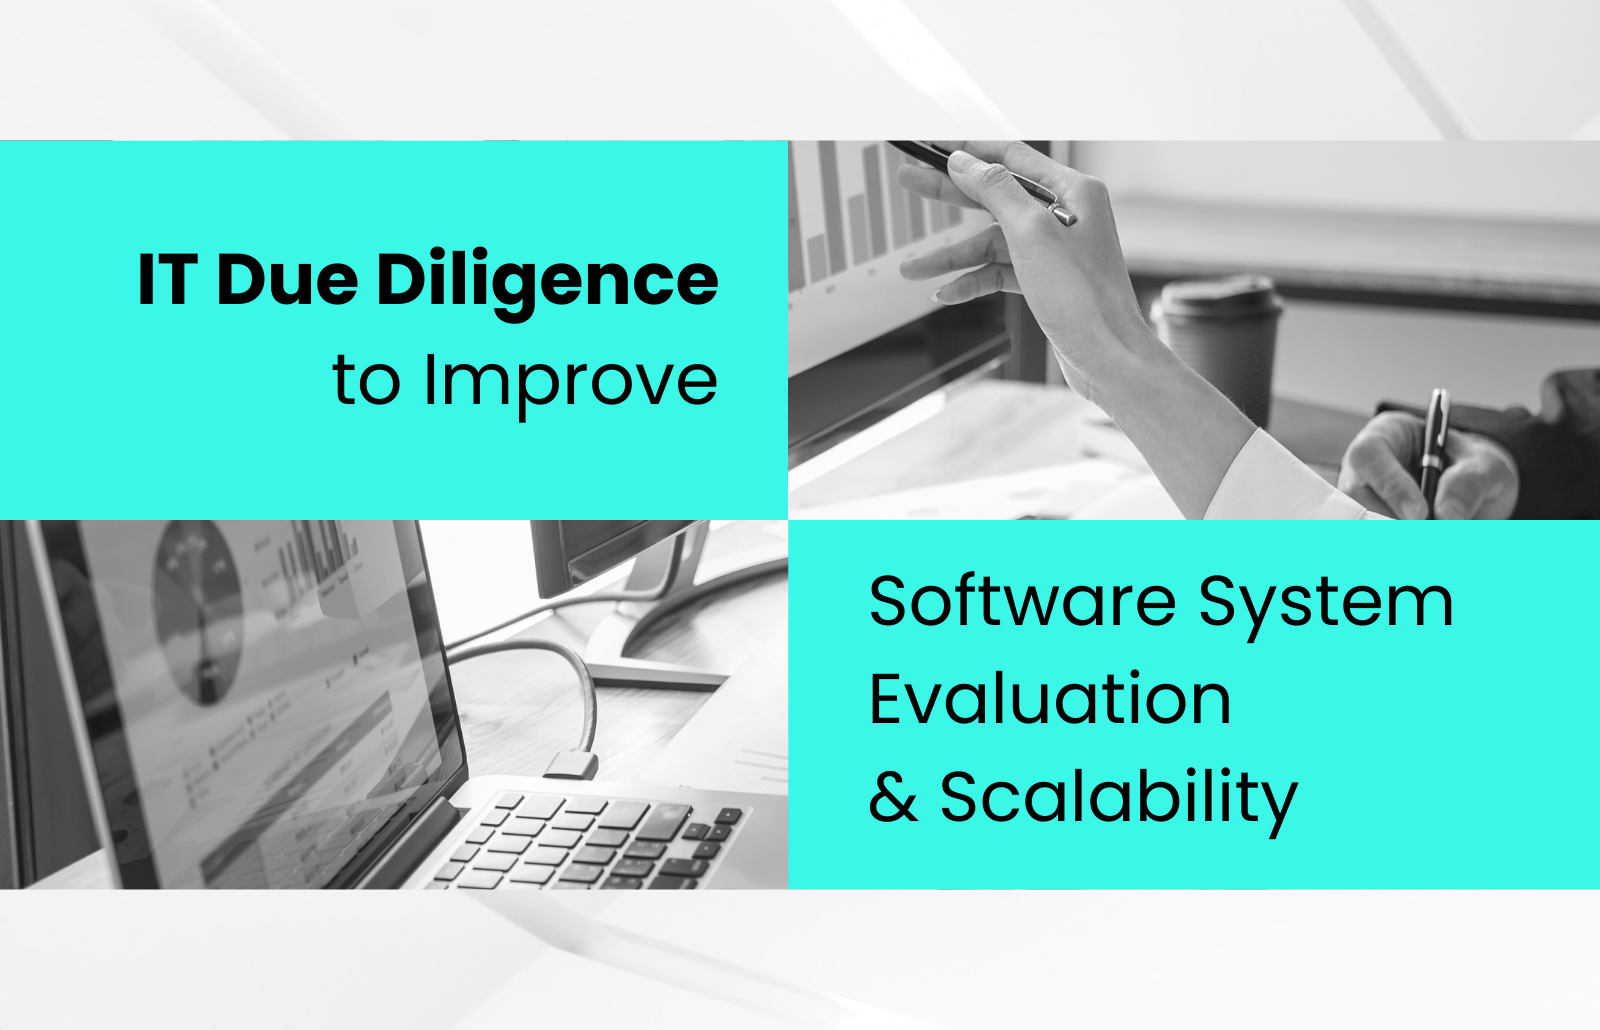 IT Due Diligence to Improve Software System Evaluation & Scalability